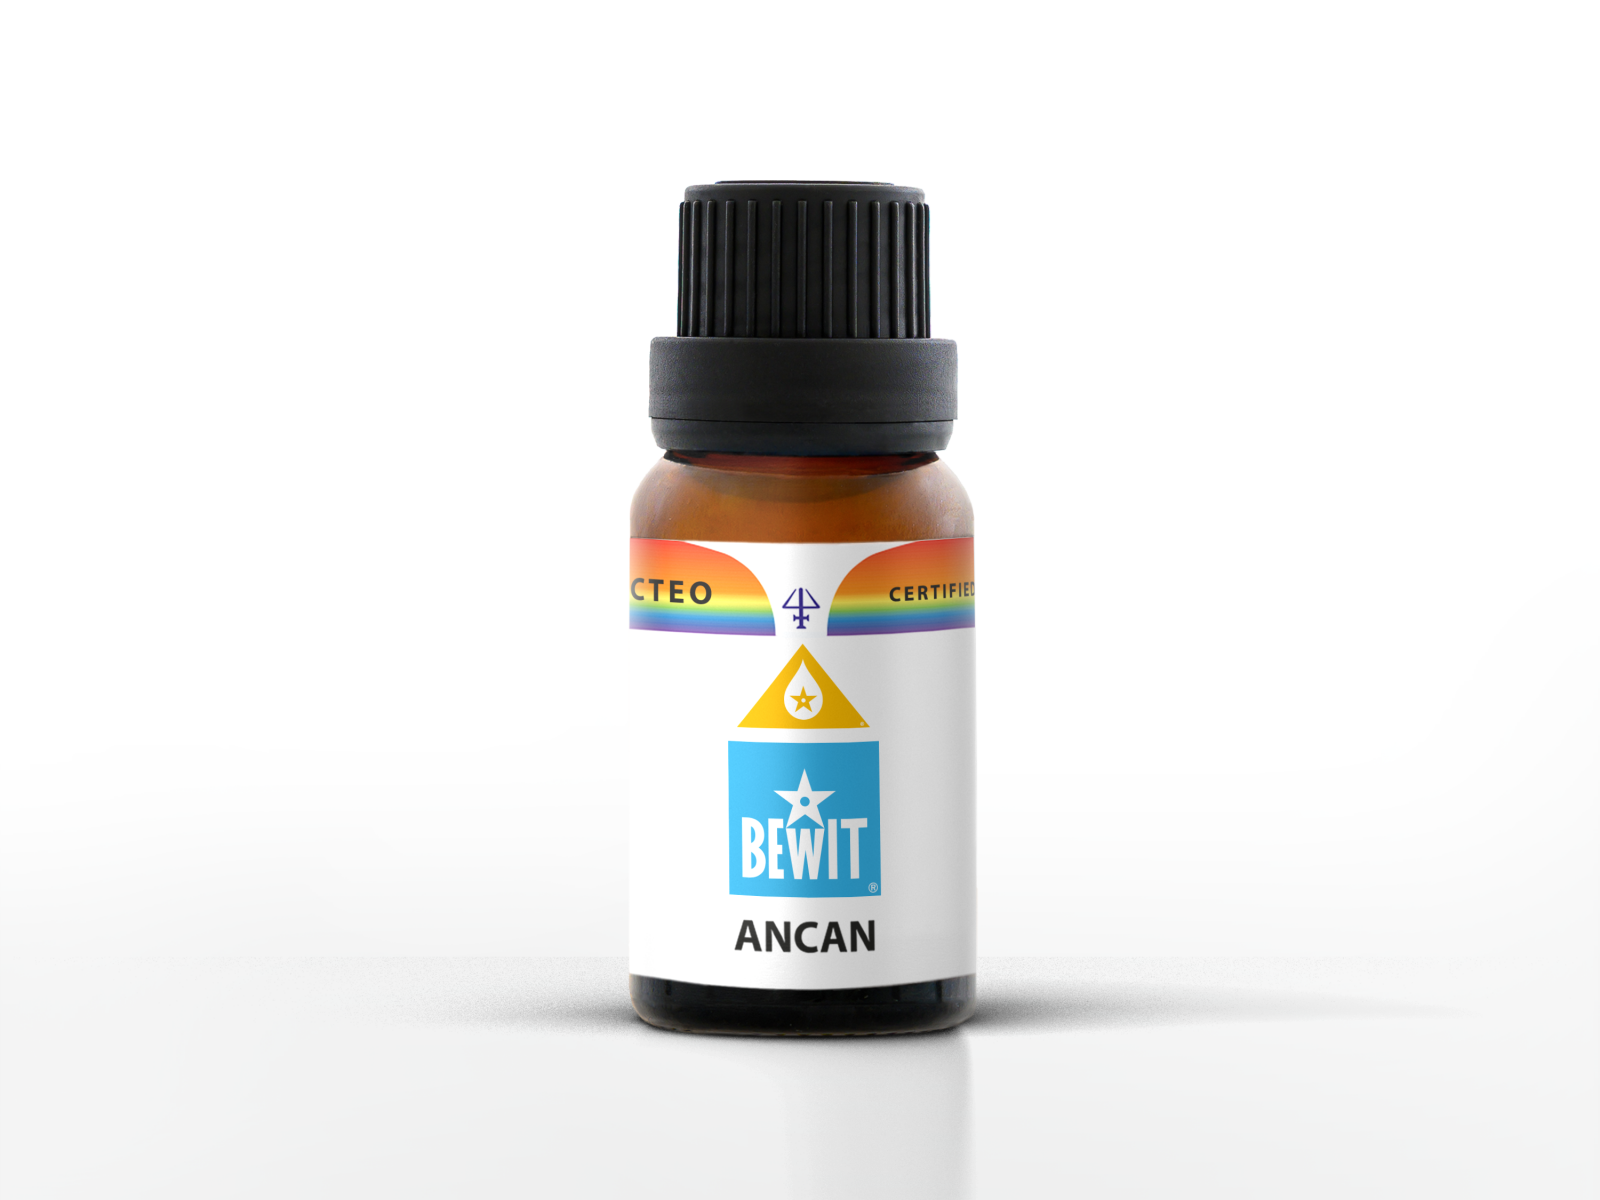 BEWIT ANCAN - Blend of essential oils - 1